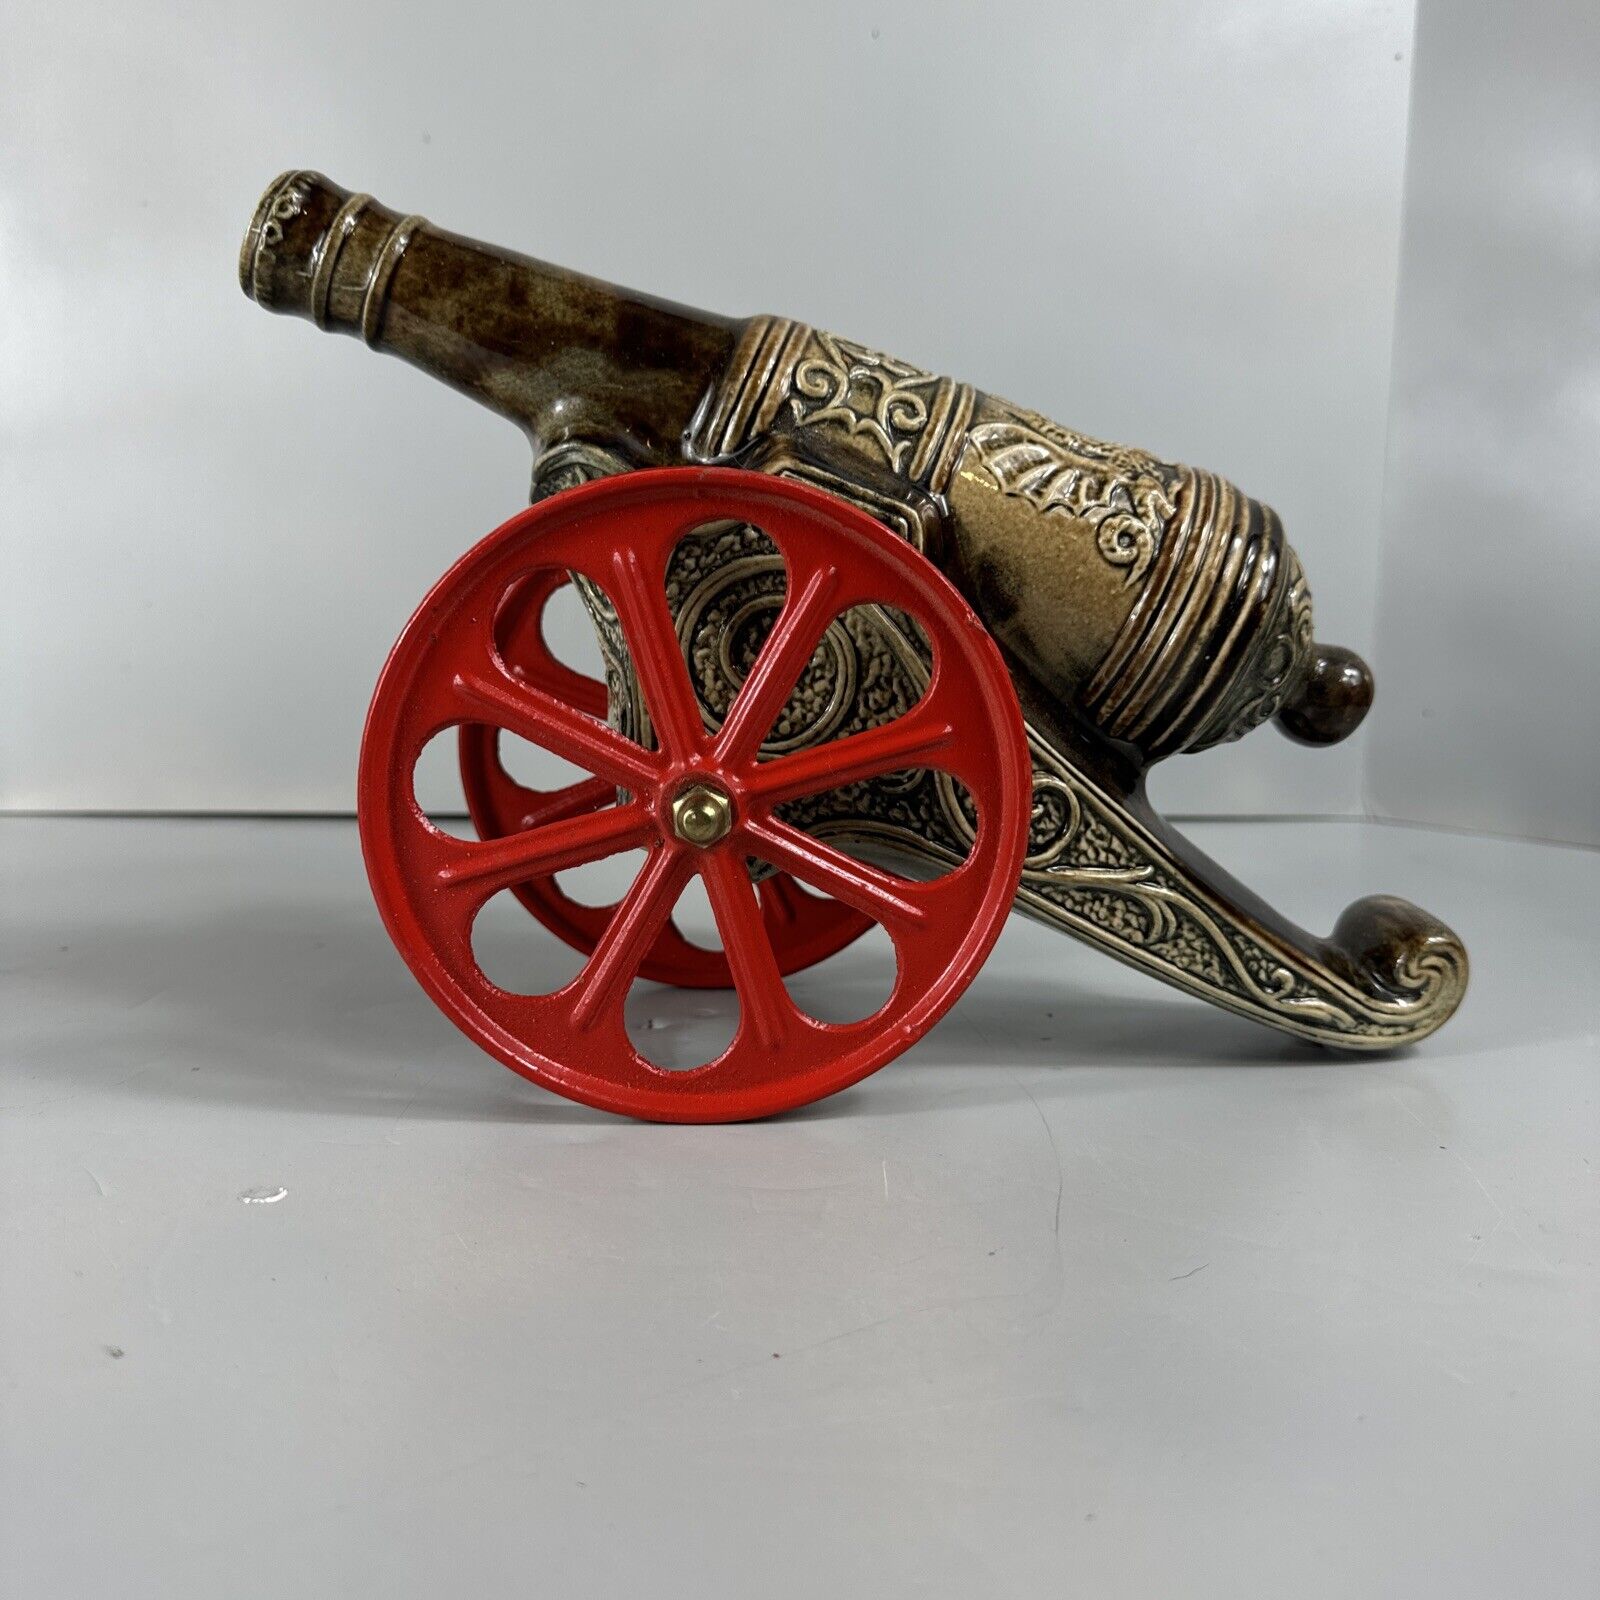 Metaxa Brandy Decanter Cannon (Working Red Wheels )Vintage Rare